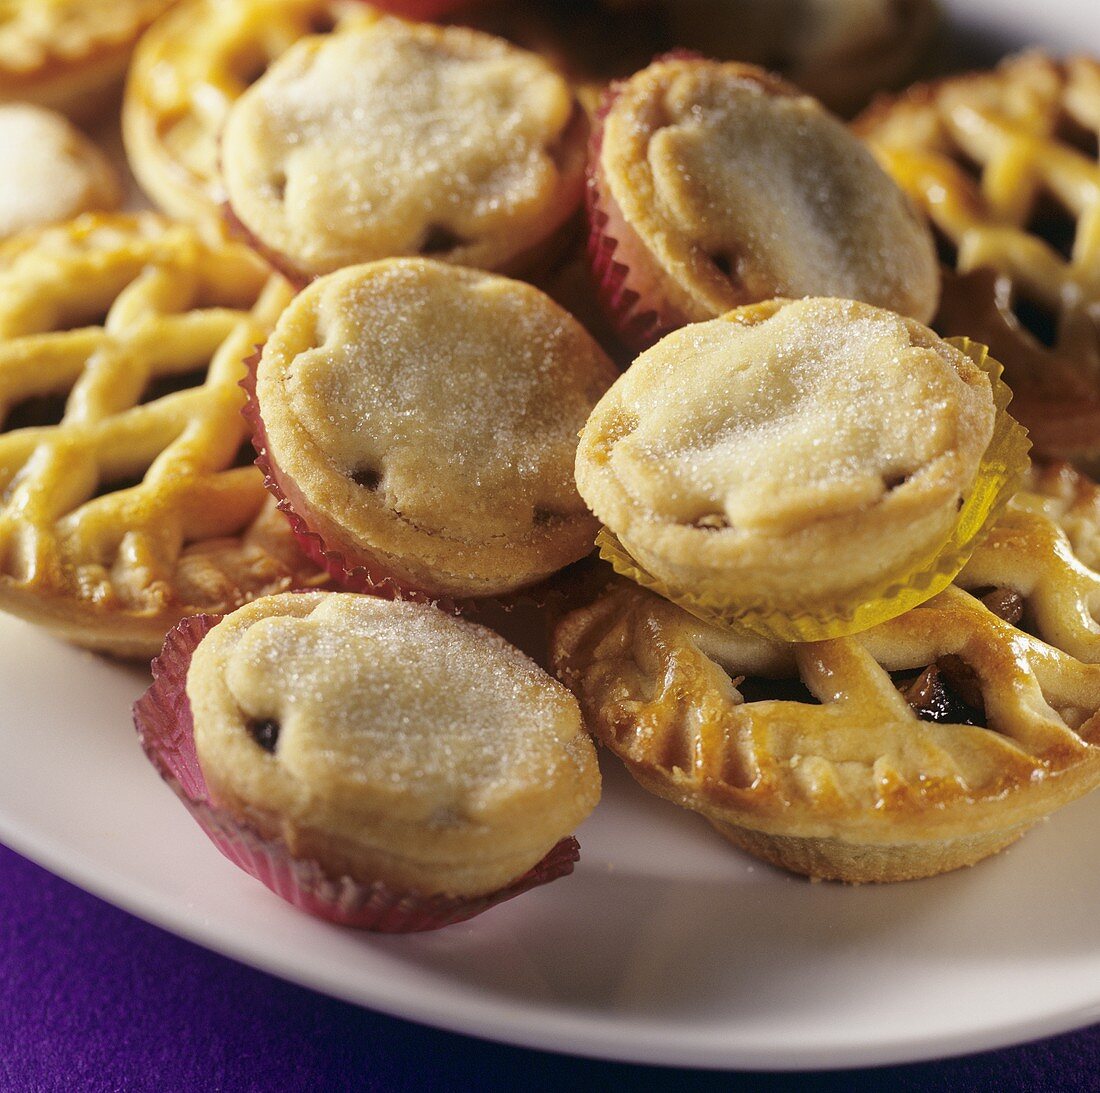 Mince pies (Christmas speciality, UK)